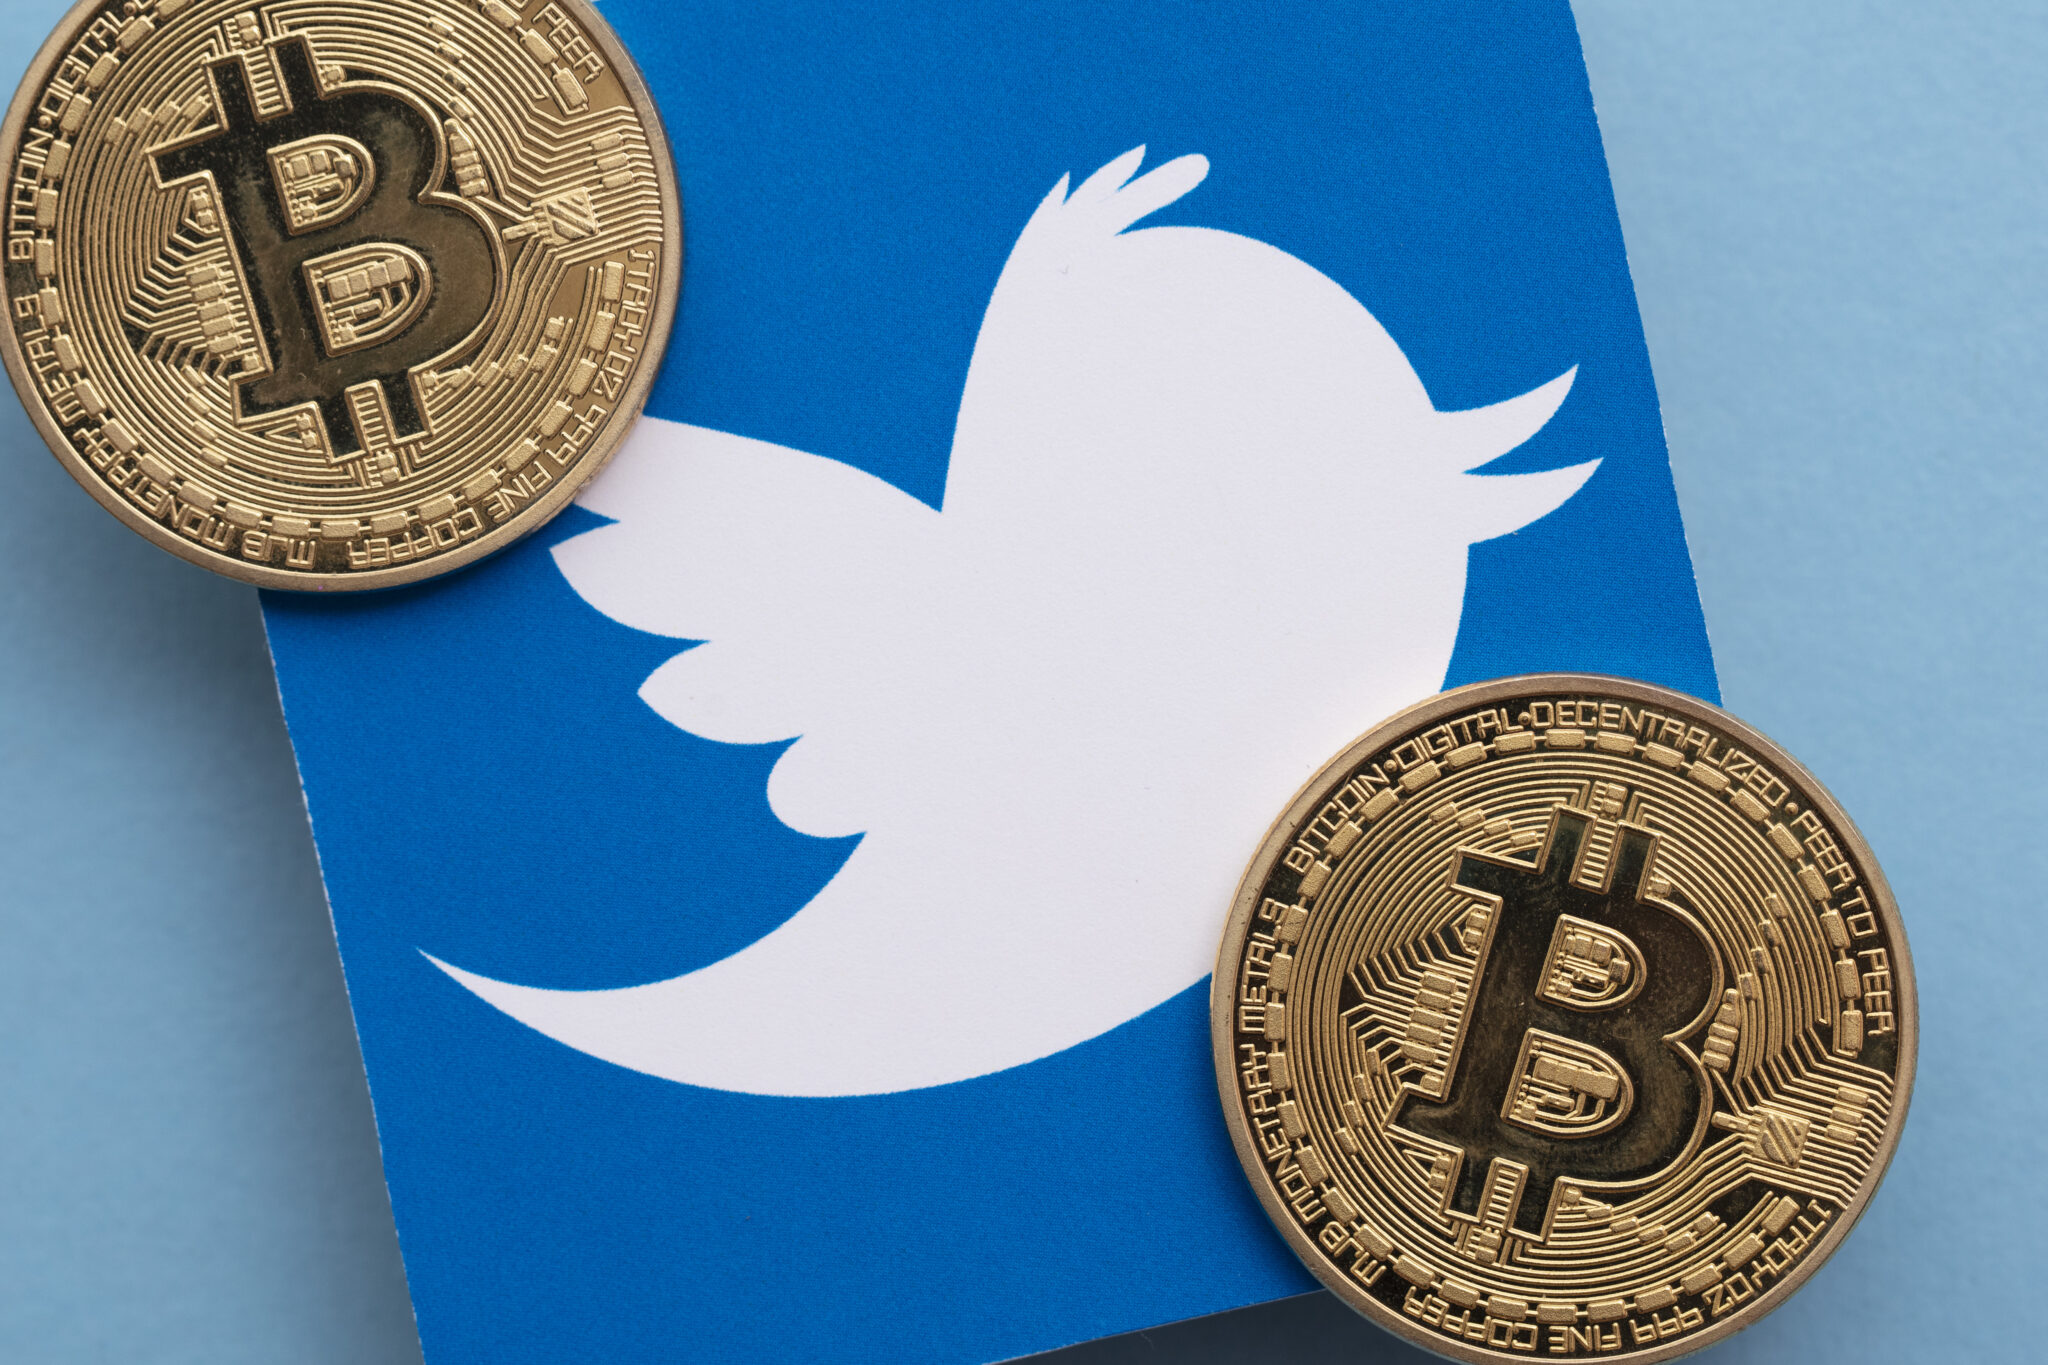 LONDON, UK - March 2021: Bitcoin cryptocurrency on a Twitter social media logo